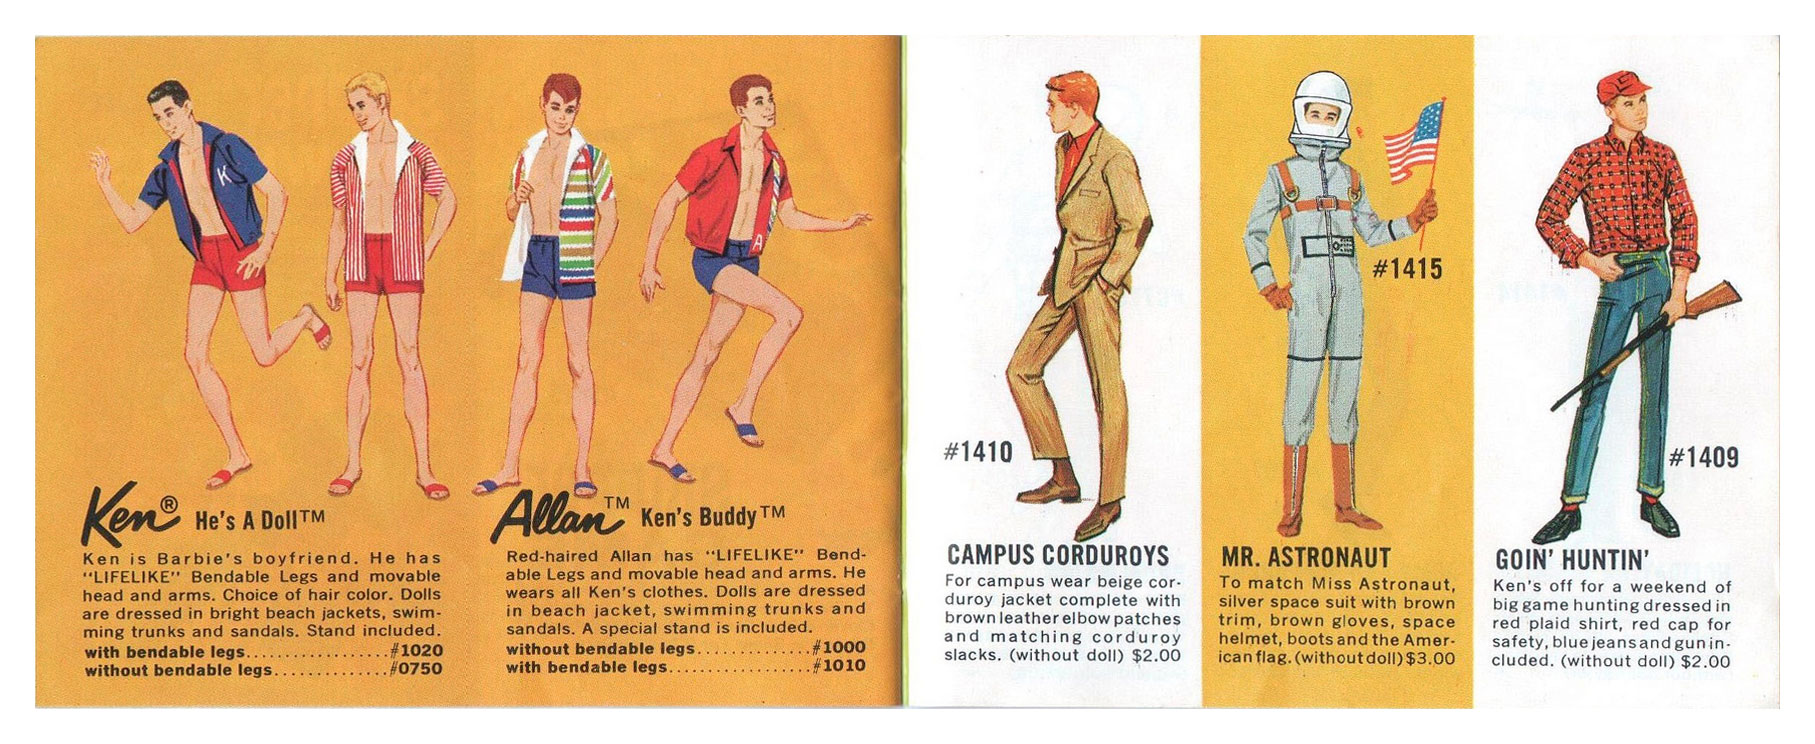 From 1965 Fashion Exclusives book 2